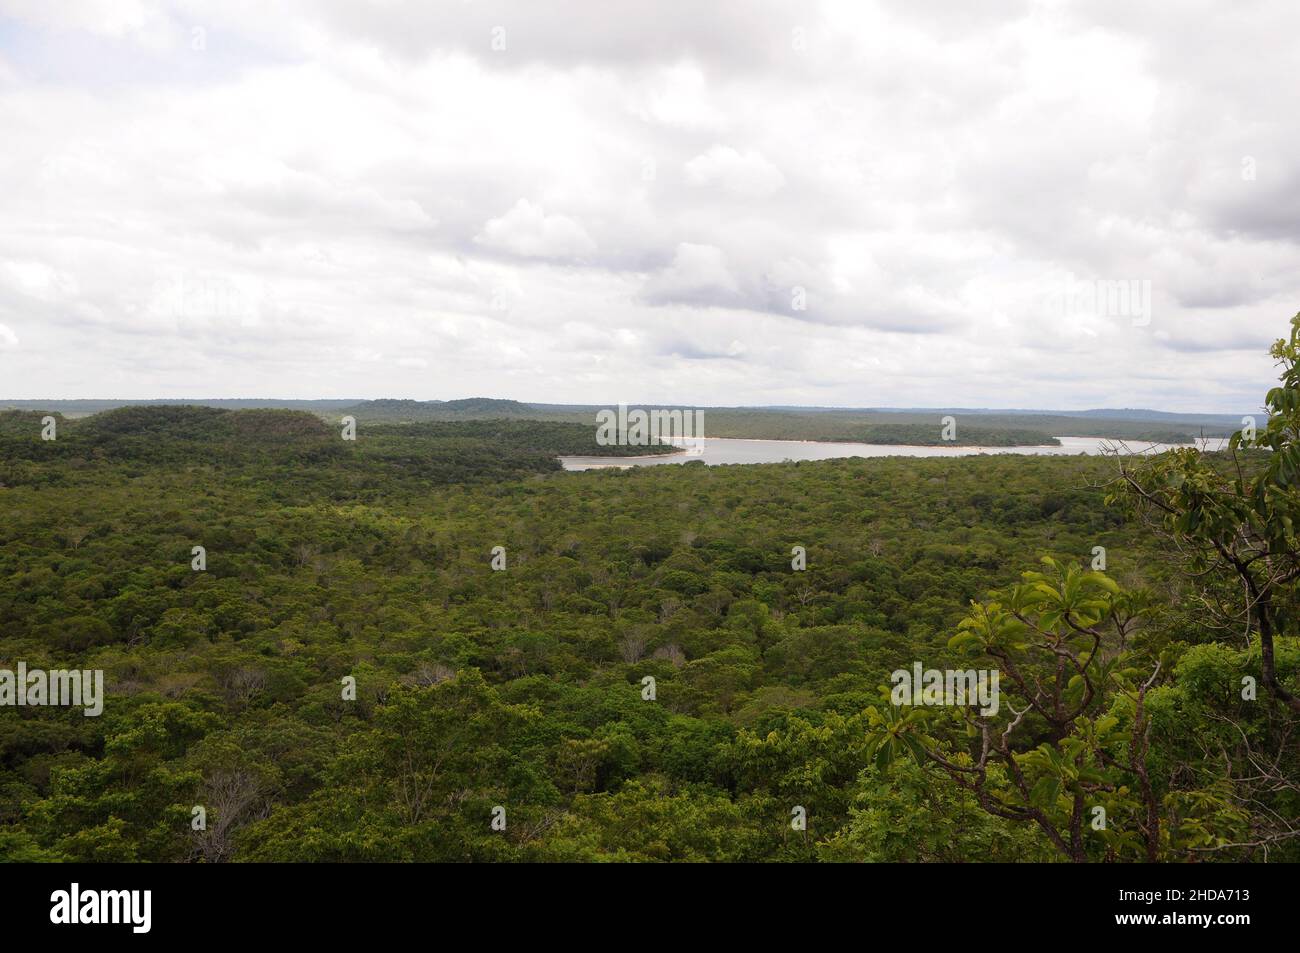 View of amazonian savannah vegetation in the city of Alter do Chão, in the state of Pará, Brazil. Stock Photo